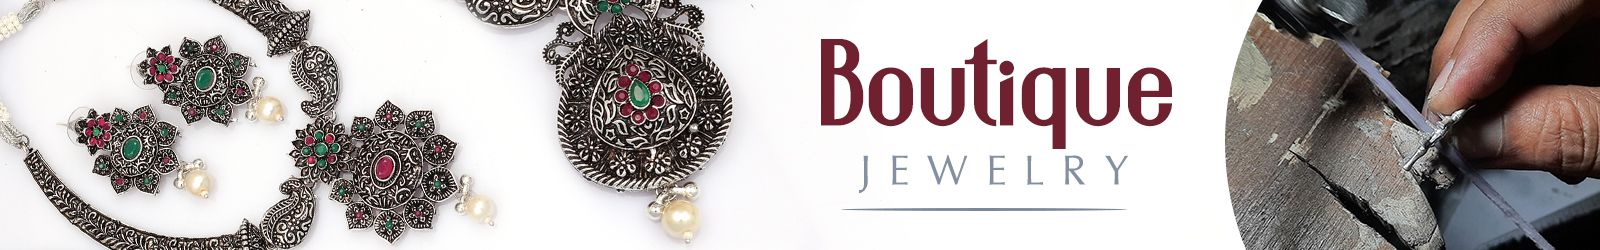 Boutique Jewelry Manufacturer